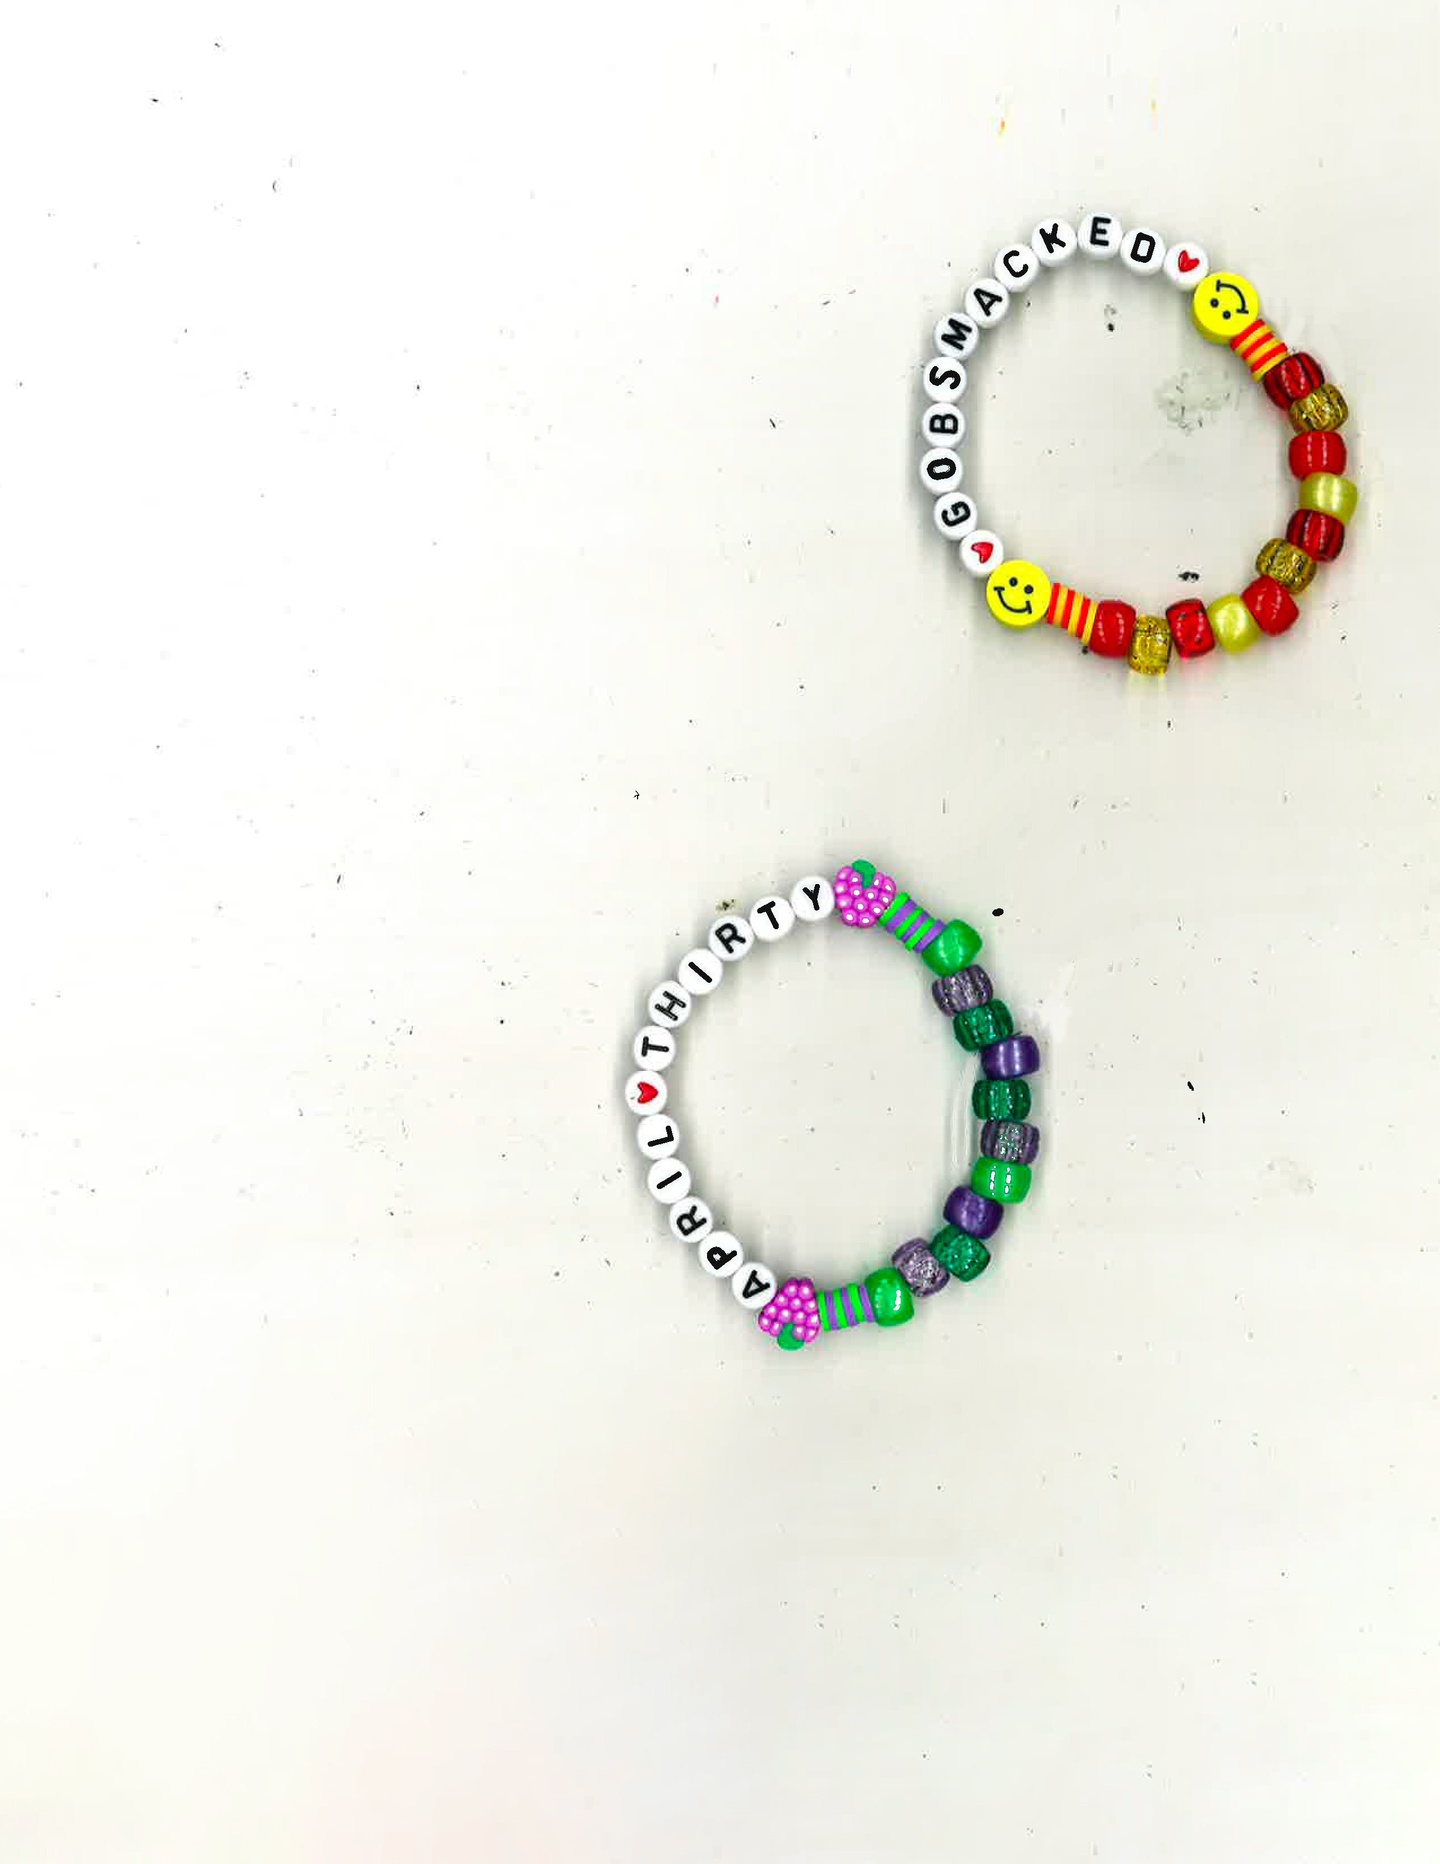 A pair of beaded bracelets on a white background; the top one includes the word Gobsmacked and the bottom one includes the words April Thirty.